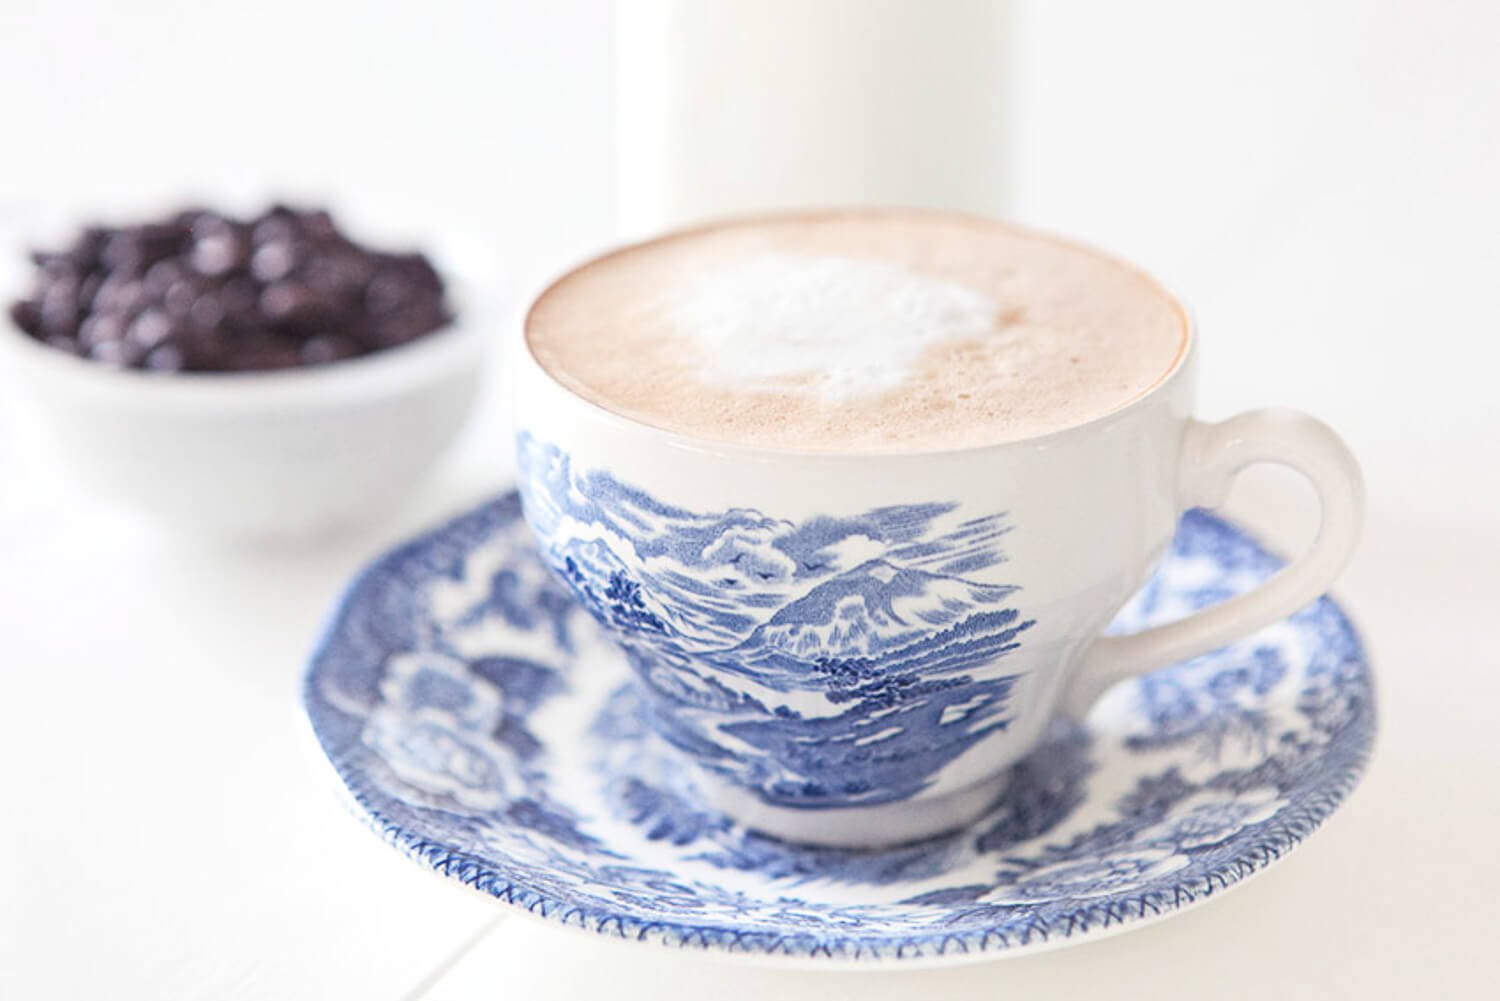 Photo of coffee in a blue and white china cup and saucer with coffee beans in the background